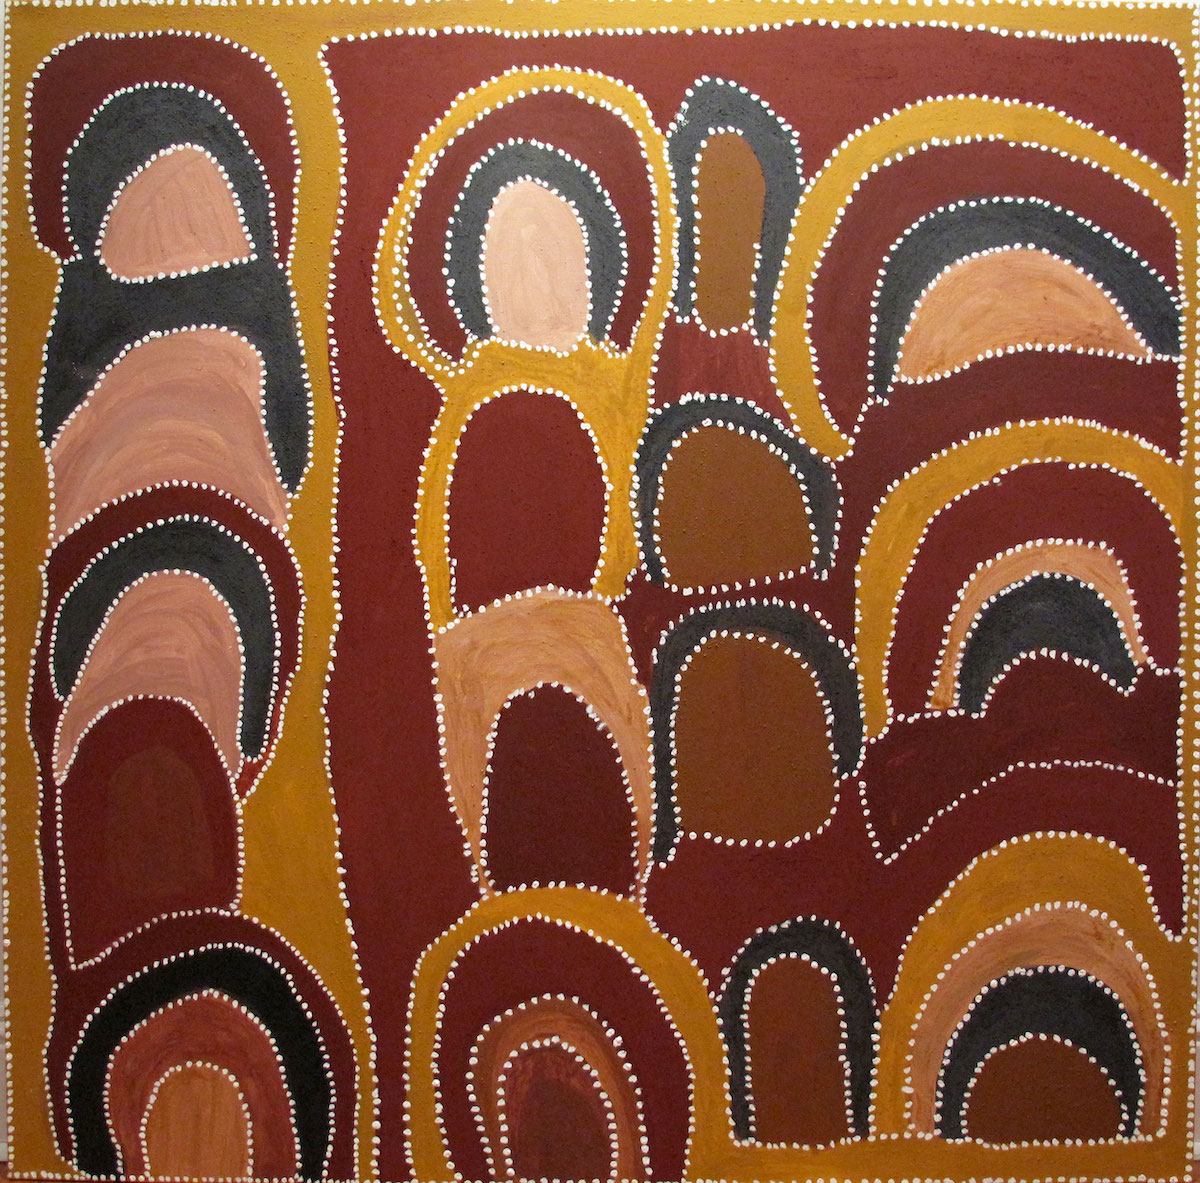 Abstract painting of columns of curved shapes in yellow ochre, red ochre, black and dusty pink, outlined by white dots.